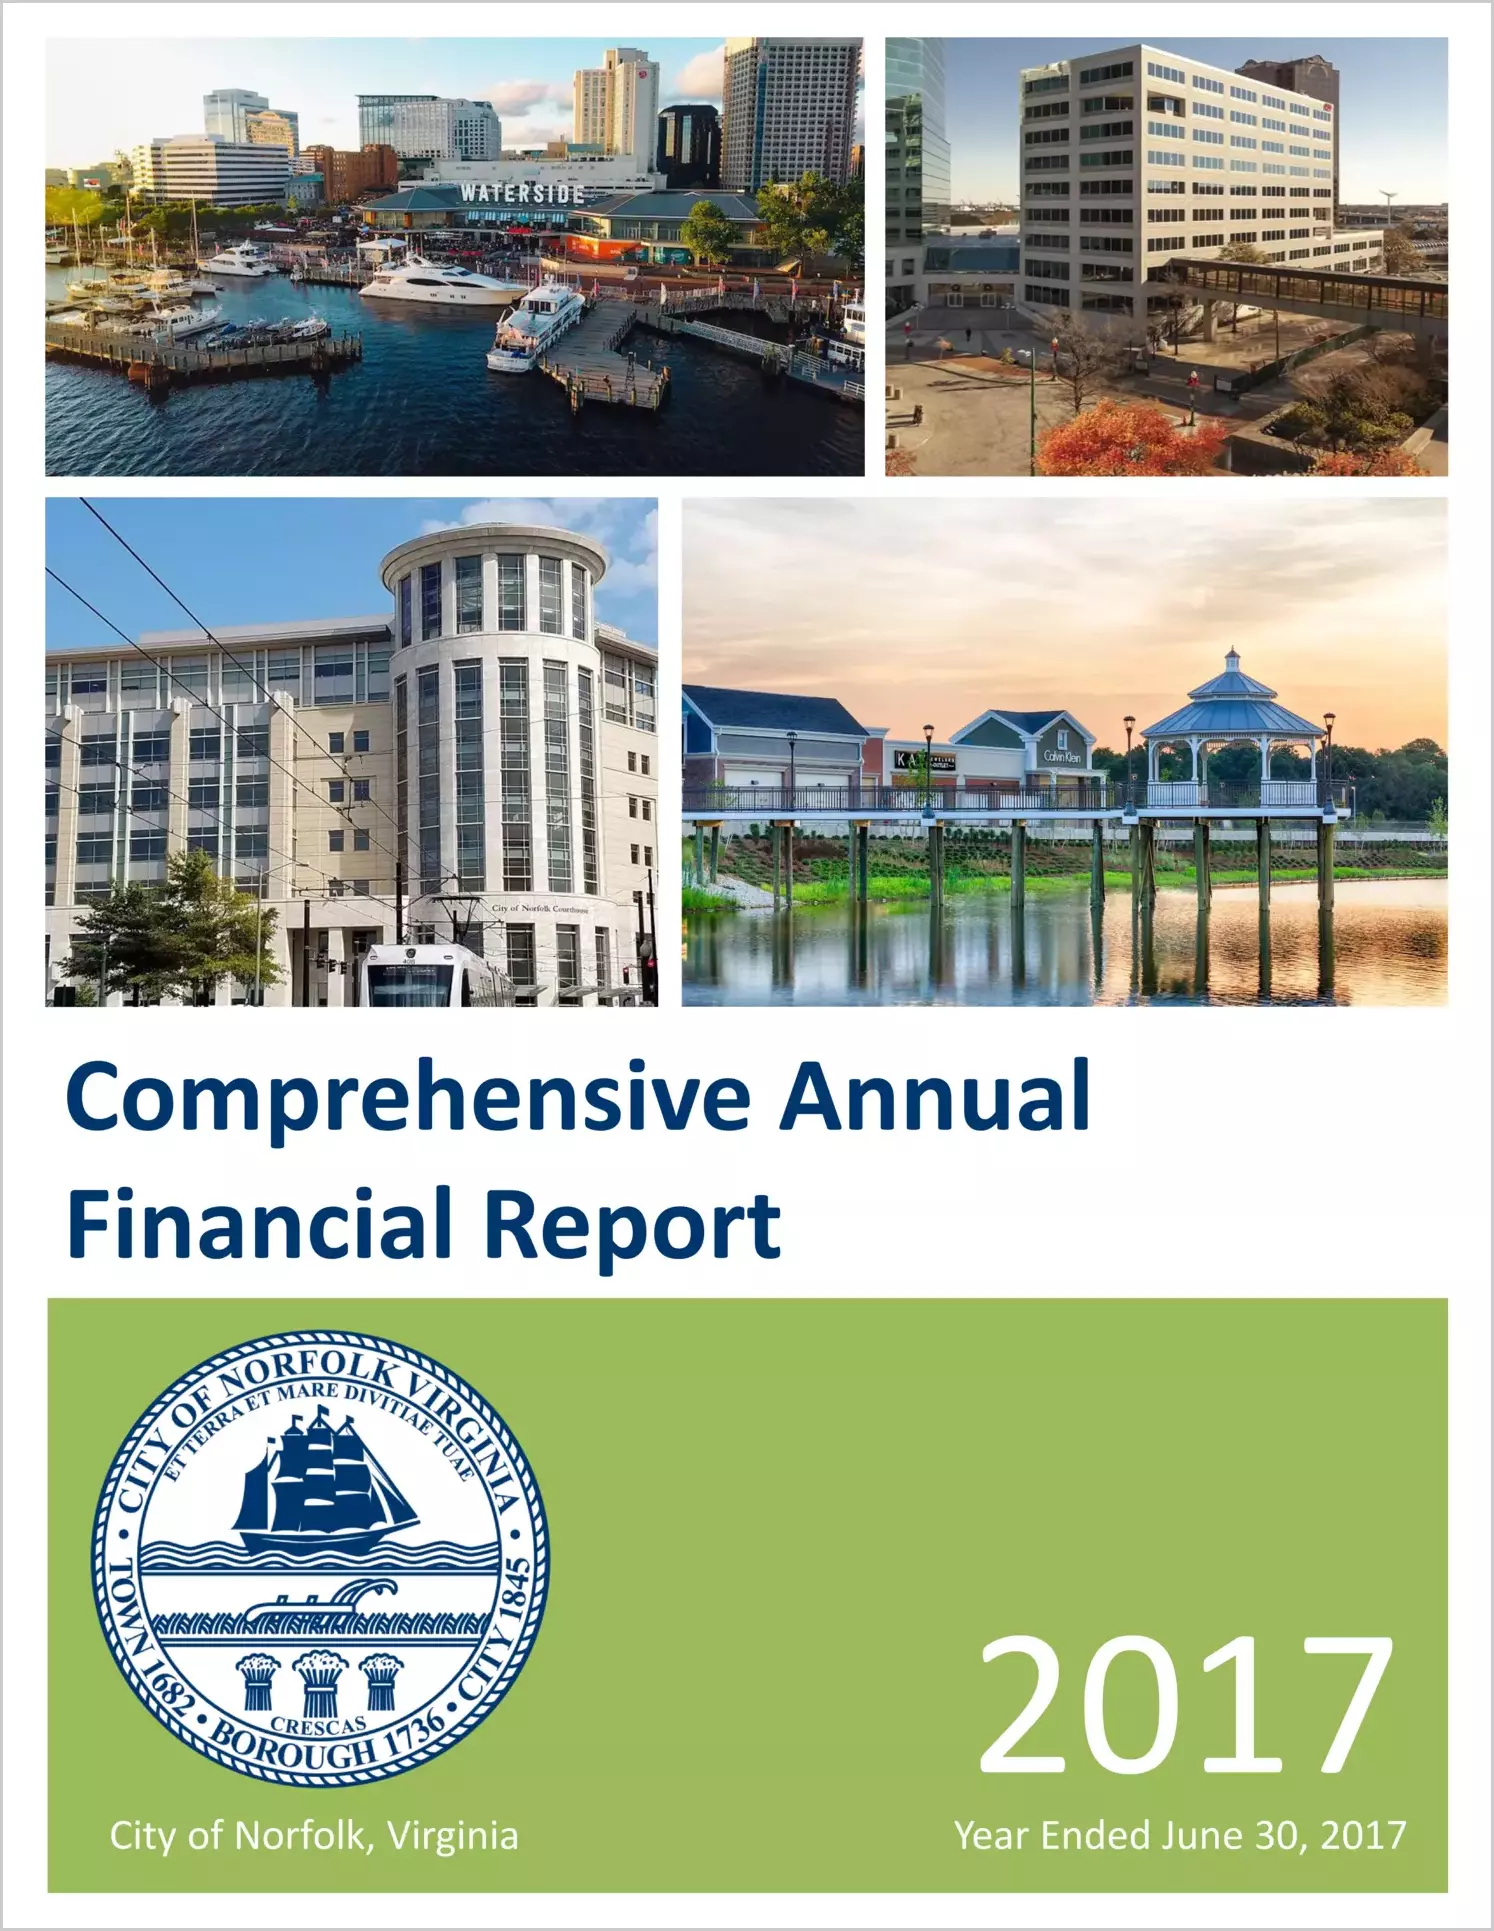 2017 Annual Financial Report for City of Norfolk